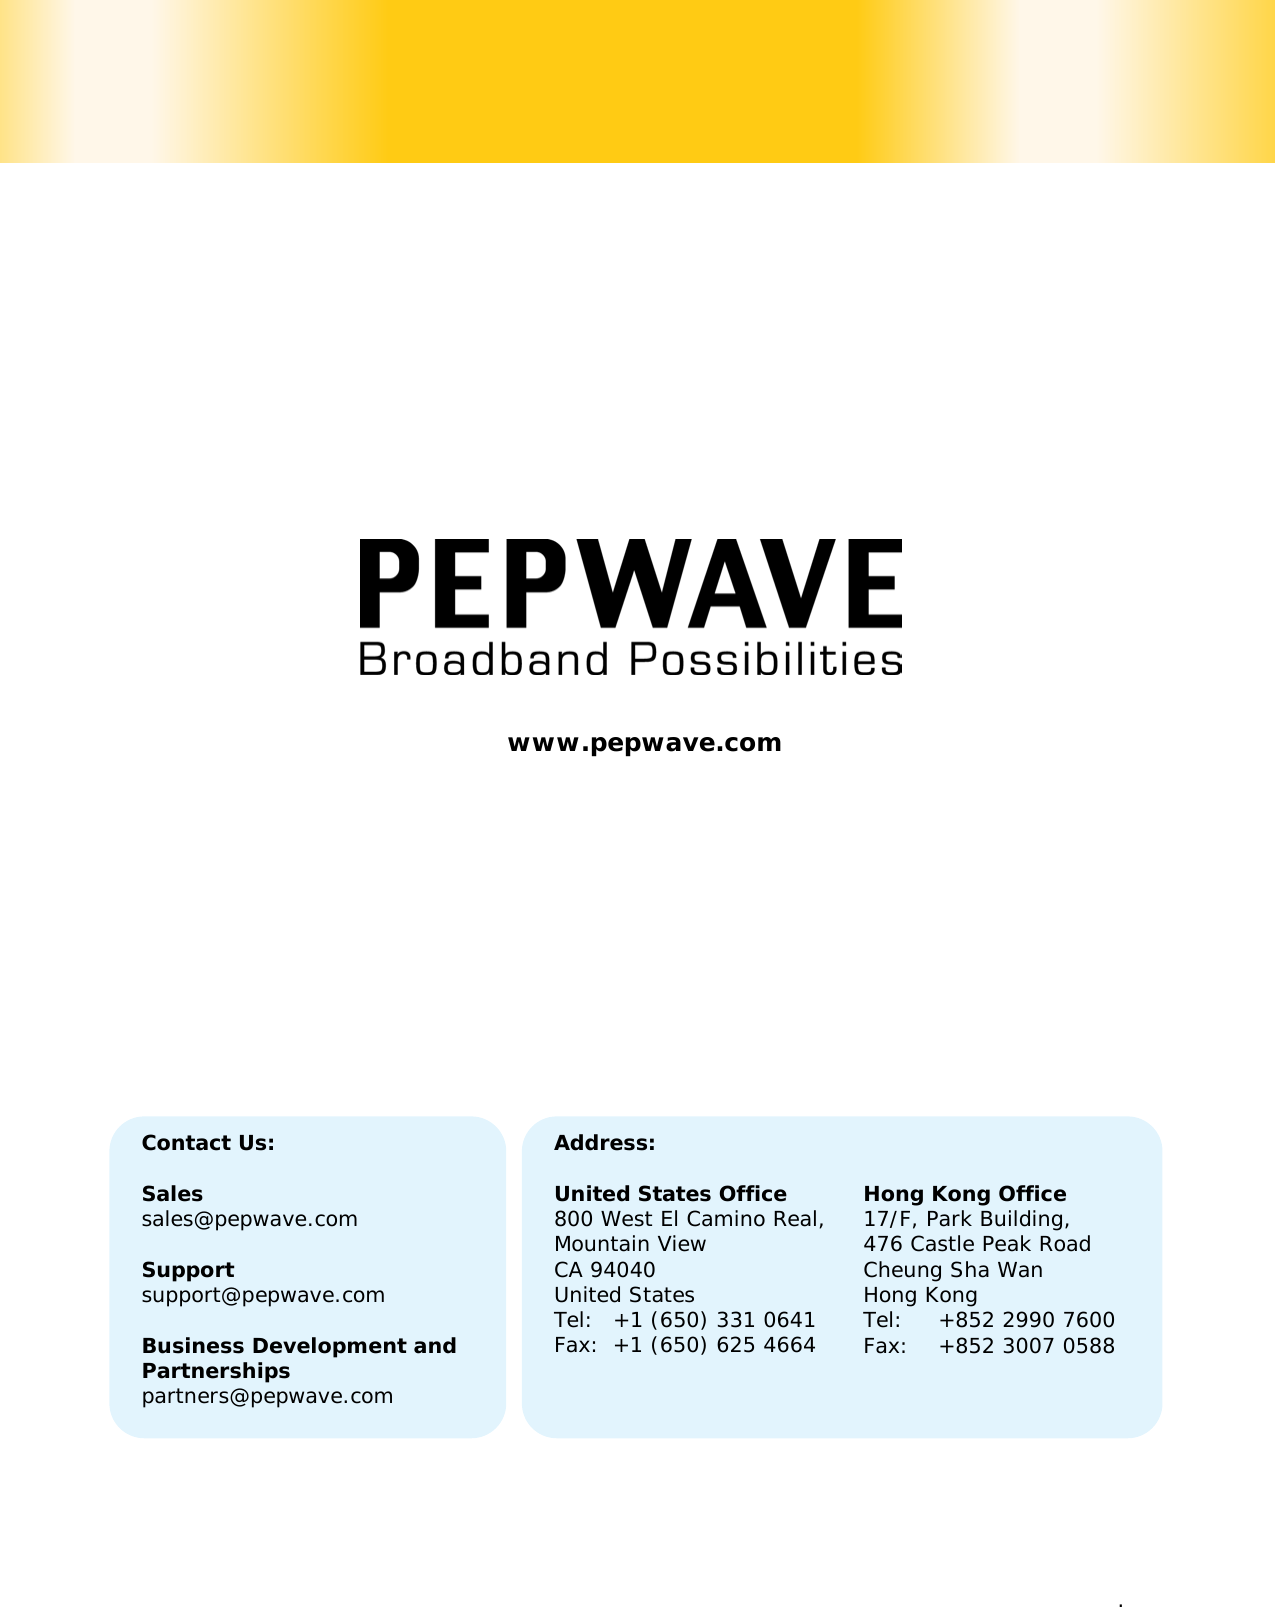   . Contact Us:  Sales sales@pepwave.com  Support support@pepwave.com  Business Development and Partnerships partners@pepwave.com Address:  United States Office 800 West El Camino Real, Mountain View CA 94040 United States Tel: +1 (650) 331 0641 Fax: +1 (650) 625 4664   Hong Kong Office 17/F, Park Building, 476 Castle Peak Road Cheung Sha Wan Hong Kong Tel: +852 2990 7600 Fax: +852 3007 0588  www.pepwave.com   